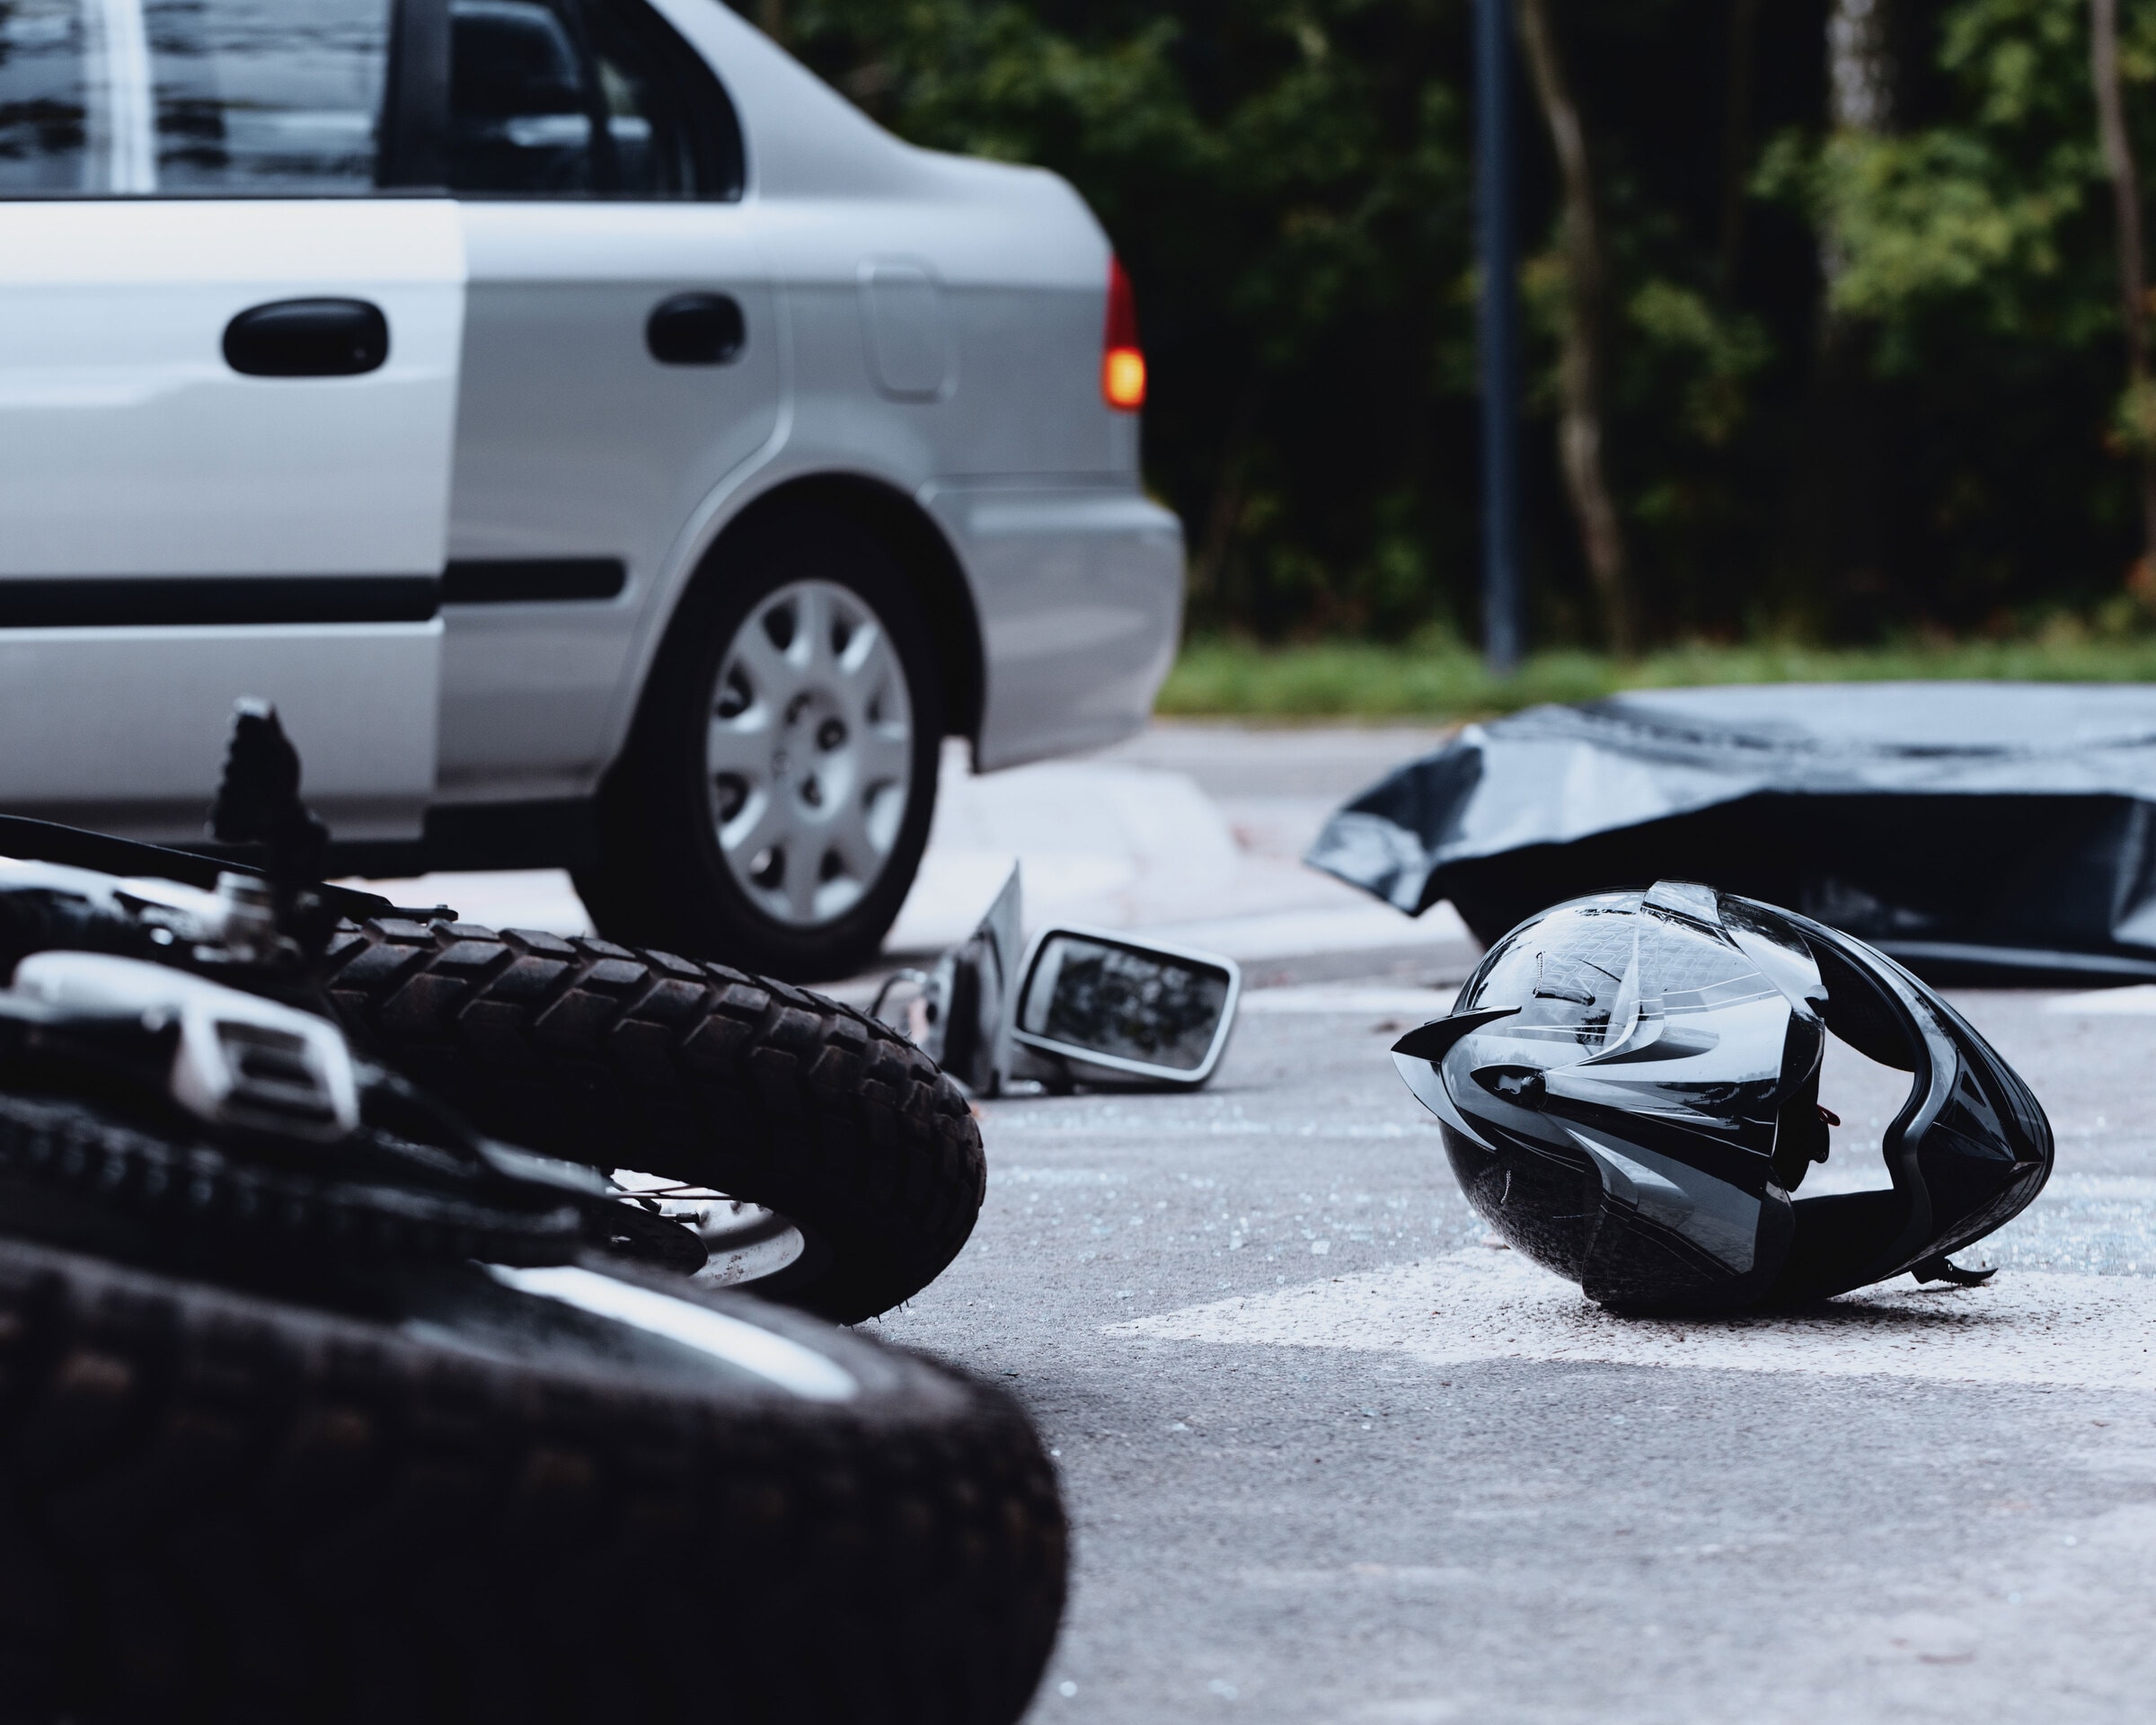 Reliable lawyers who are dedicated to providing support and guidance to those affected by car and motor vehicle accidents in Corpus Christi